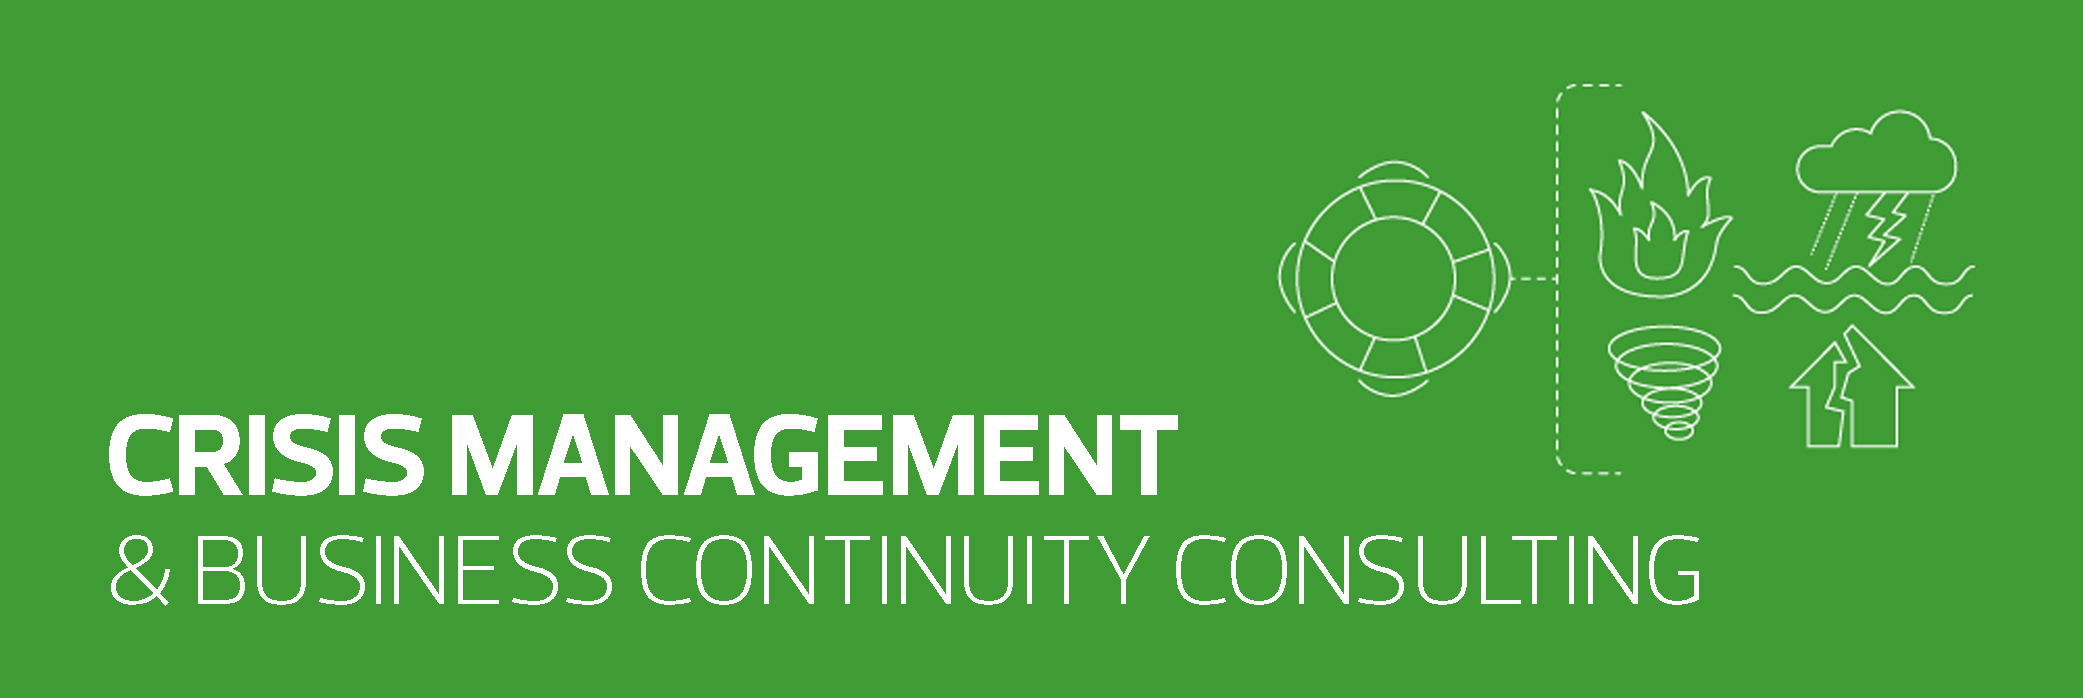 RSM offers Crisis management and Business continuity consulting services